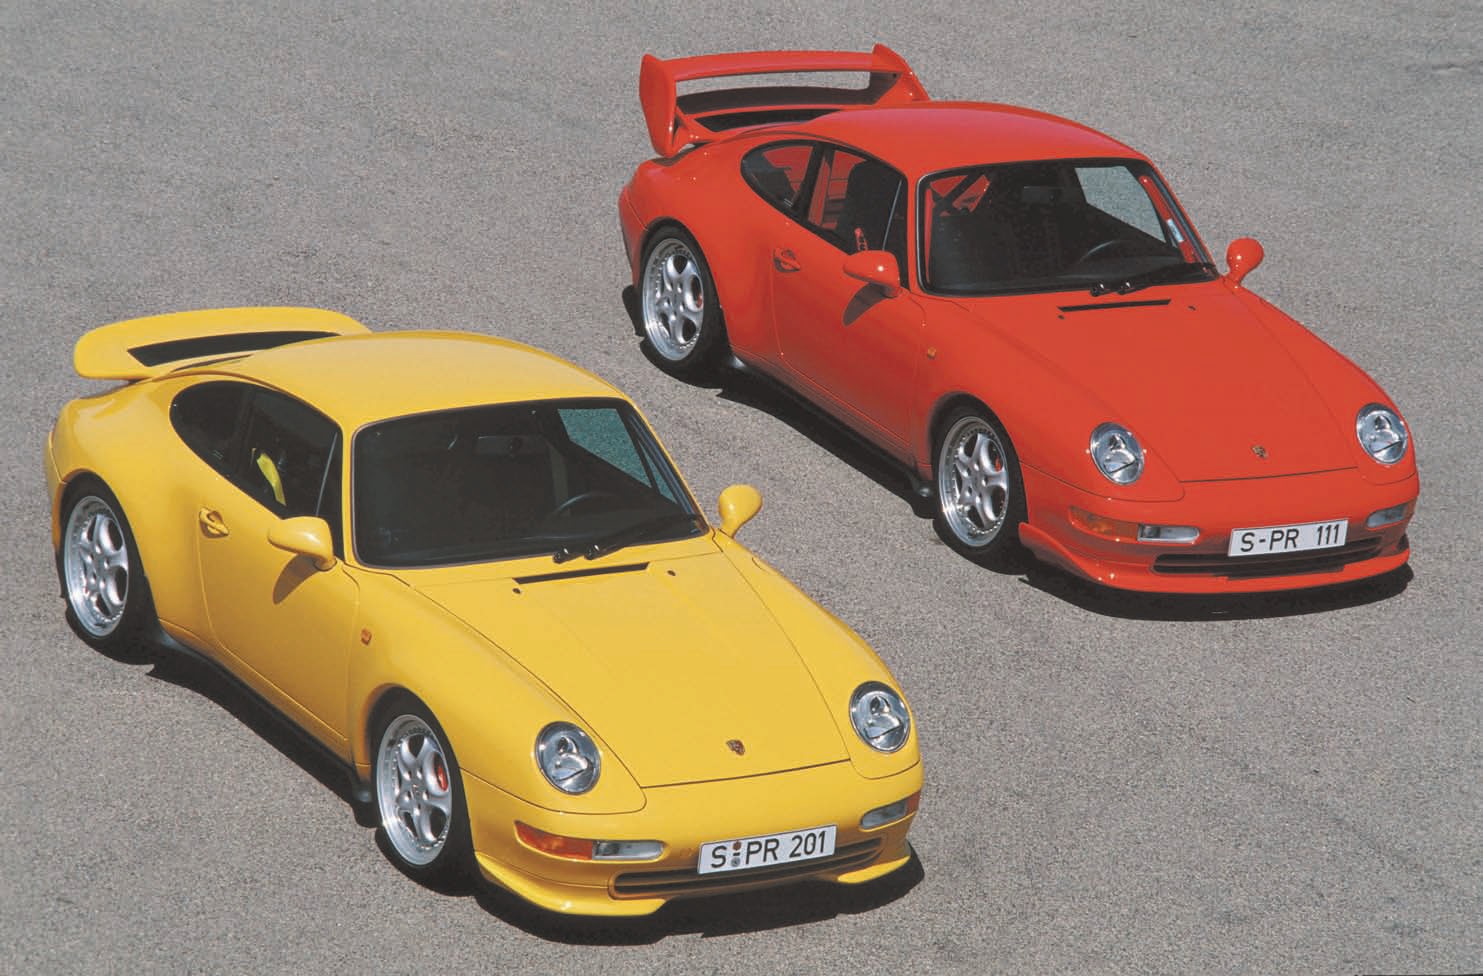 To homologate the 993 Carrera RSR 3.8 for racing, Zuffenhausen produced a run of 1,014 street-legal 300-horsepower RS 3.8 models in 1995, including this yellow coupe. On the right is the M003 RS 3.8 Club Sport, of which Porsche assembled 227. Porsche Archiv